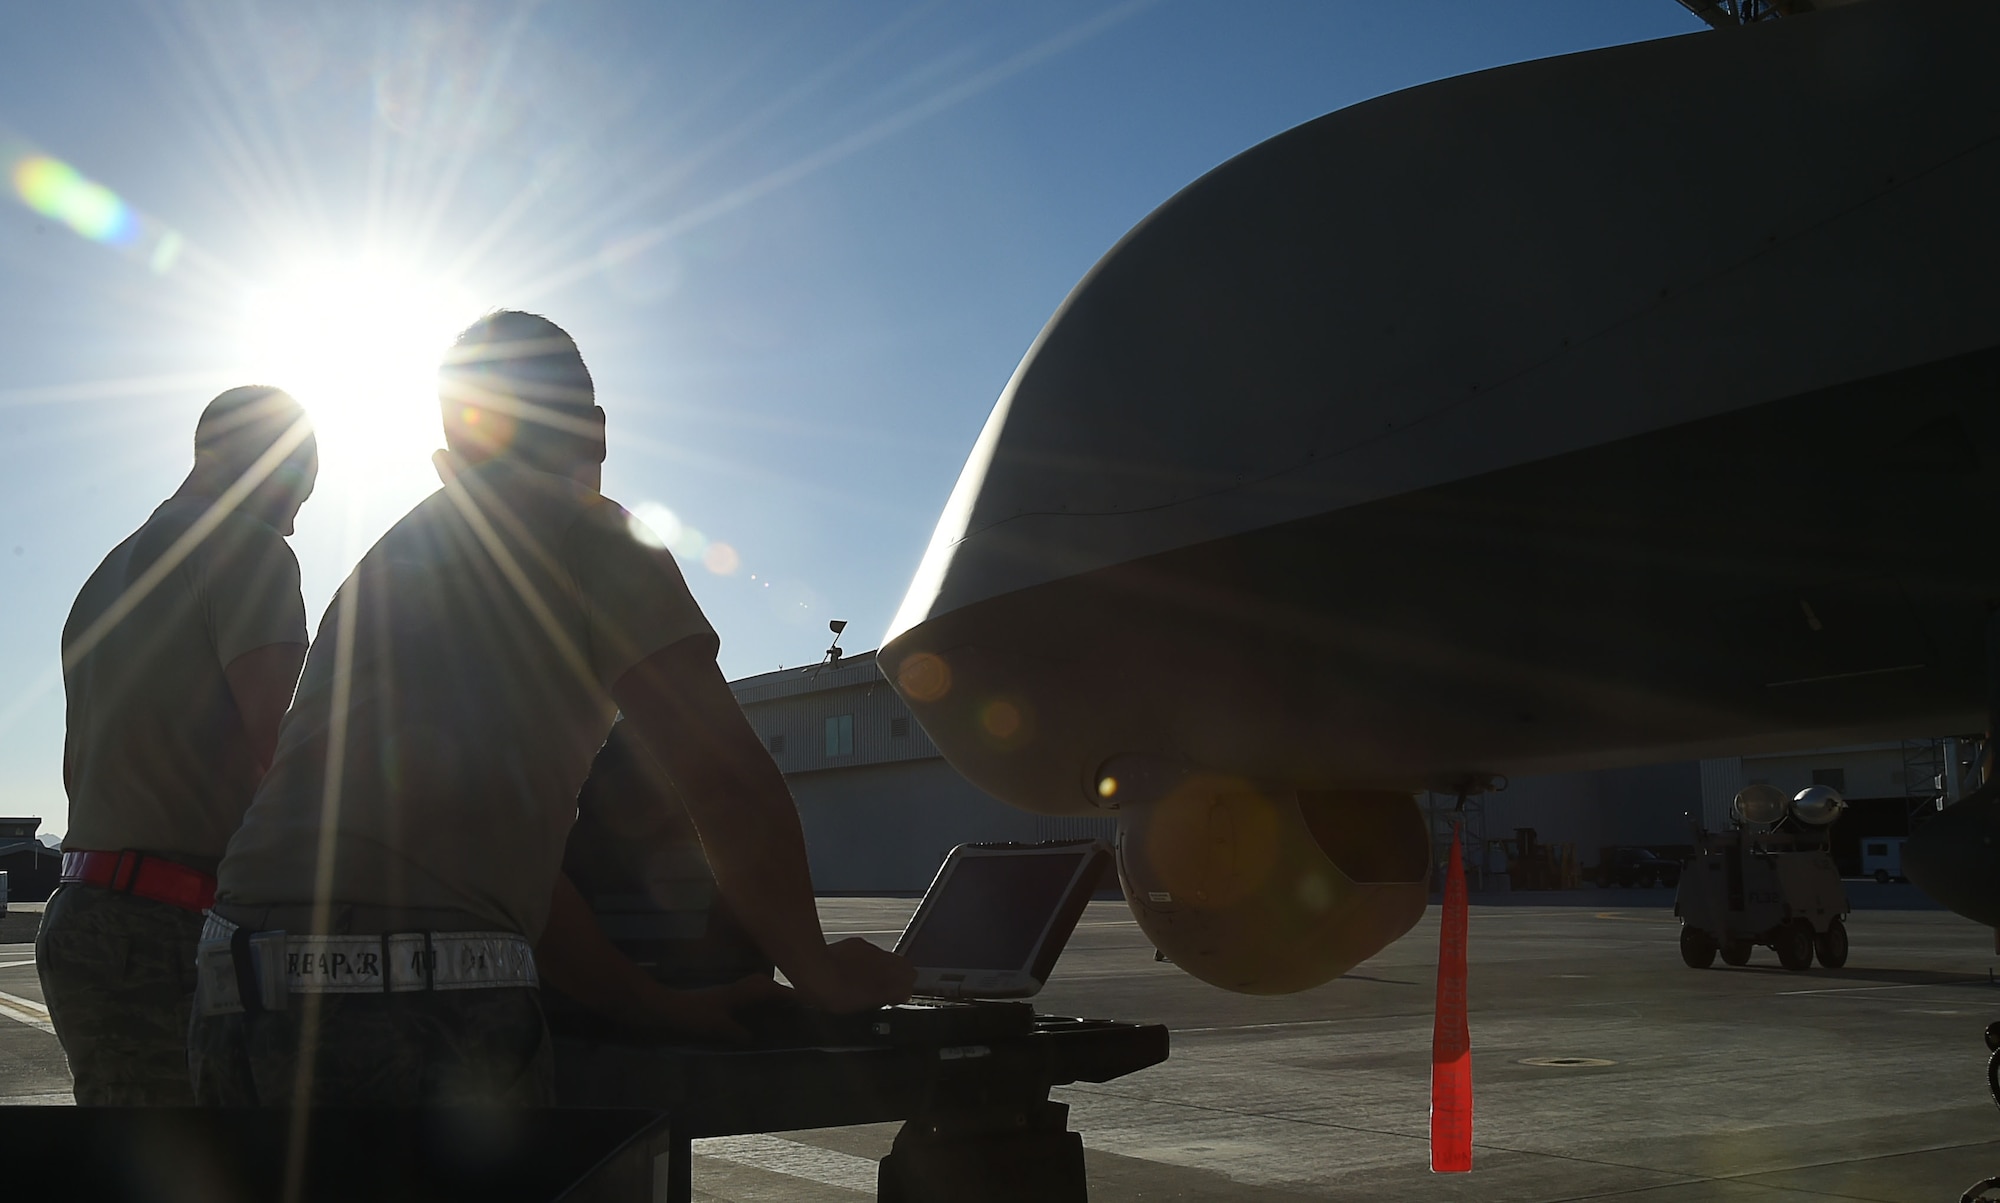 Crew chiefs assigned to the 432nd Aircraft Maintenance Squadron perform preflight checks on an MQ-9 Reaper prior to its departure in support of Red Flag 16-03 July 19, 2016, at Creech Air Force Base, Nevada.  Red Flag is a combat training exercise with emphasis on warfare tactics such as intelligence, electronic warfare, and night missions.  (U.S. Air Force photo by Airman 1st Class James Thompson/Released)